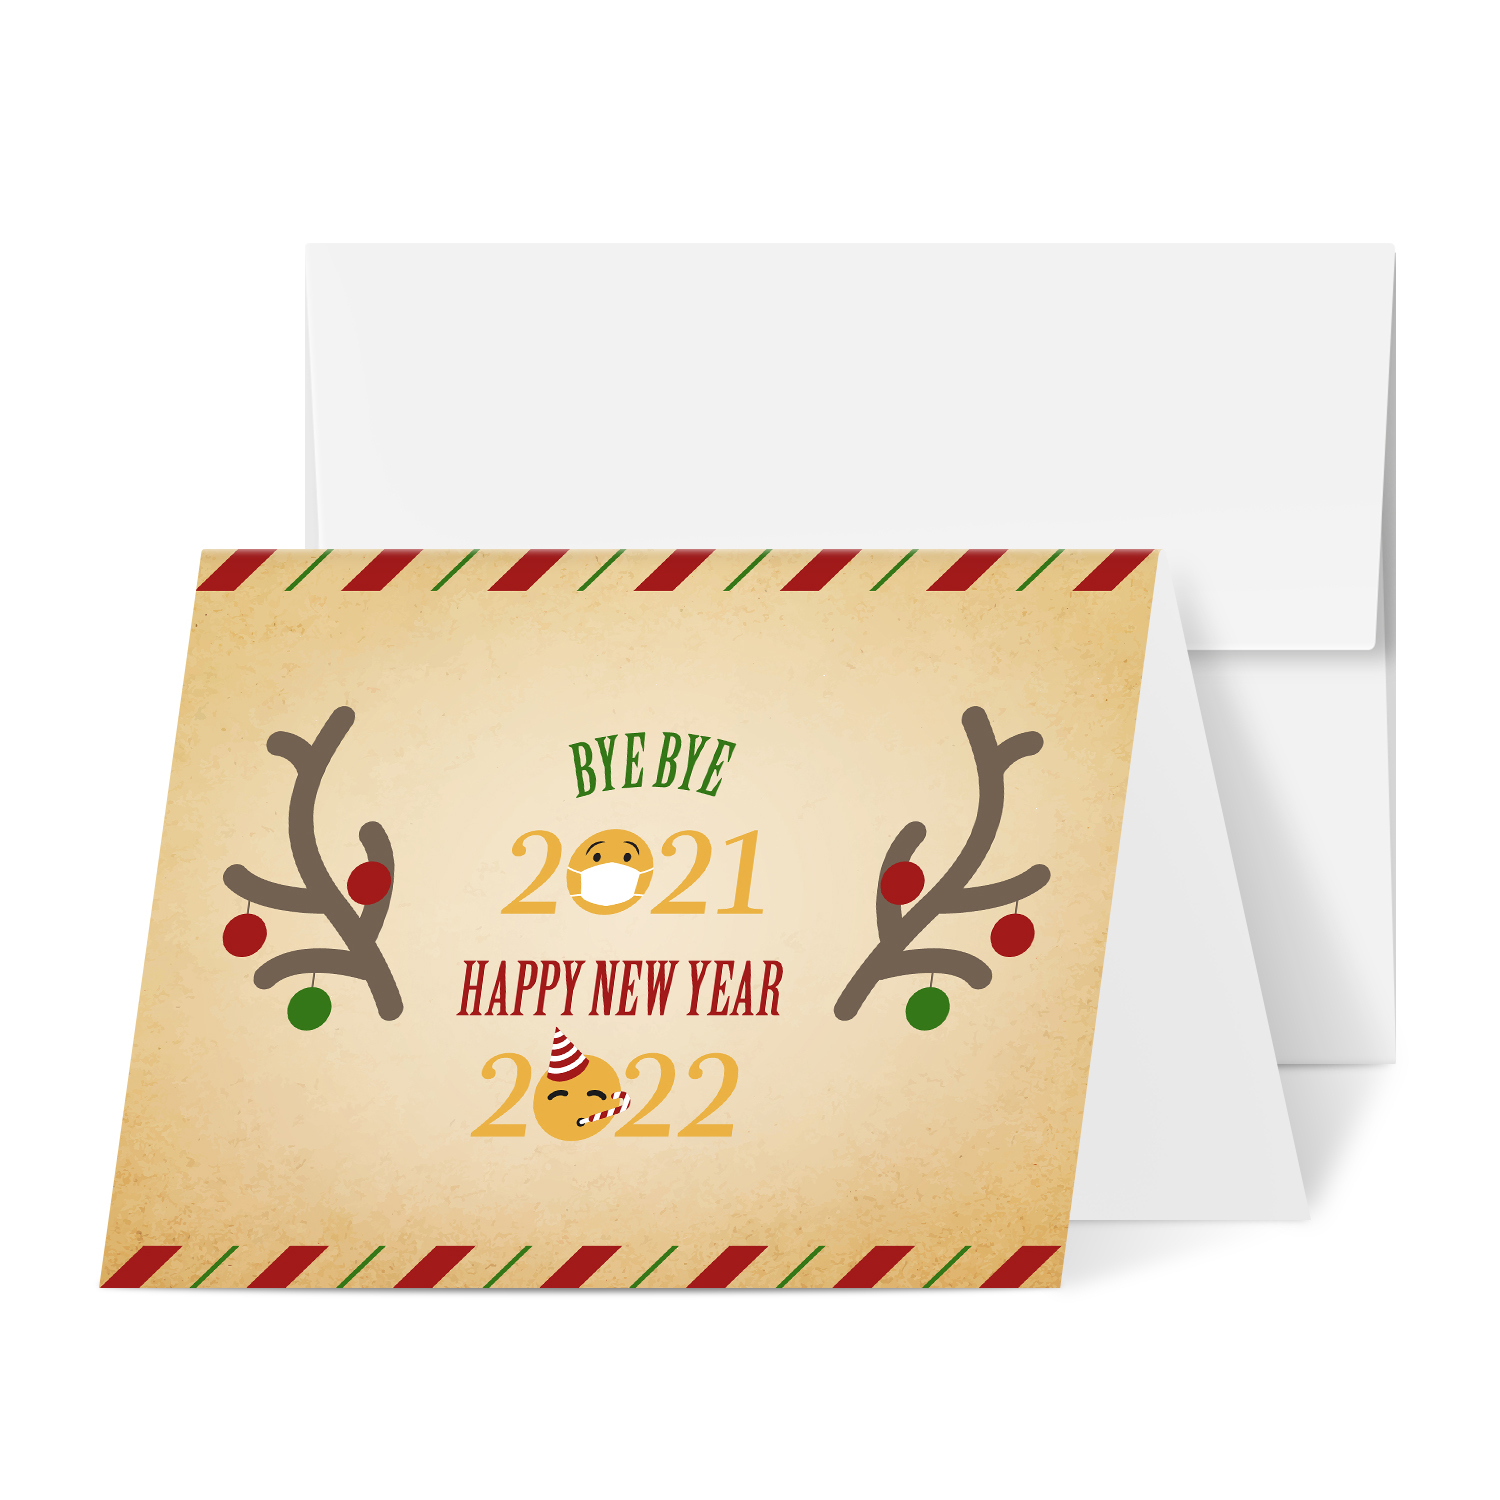 Happy New Year 2022 Cards - Bulk and Wholesale - Fine Cardstock